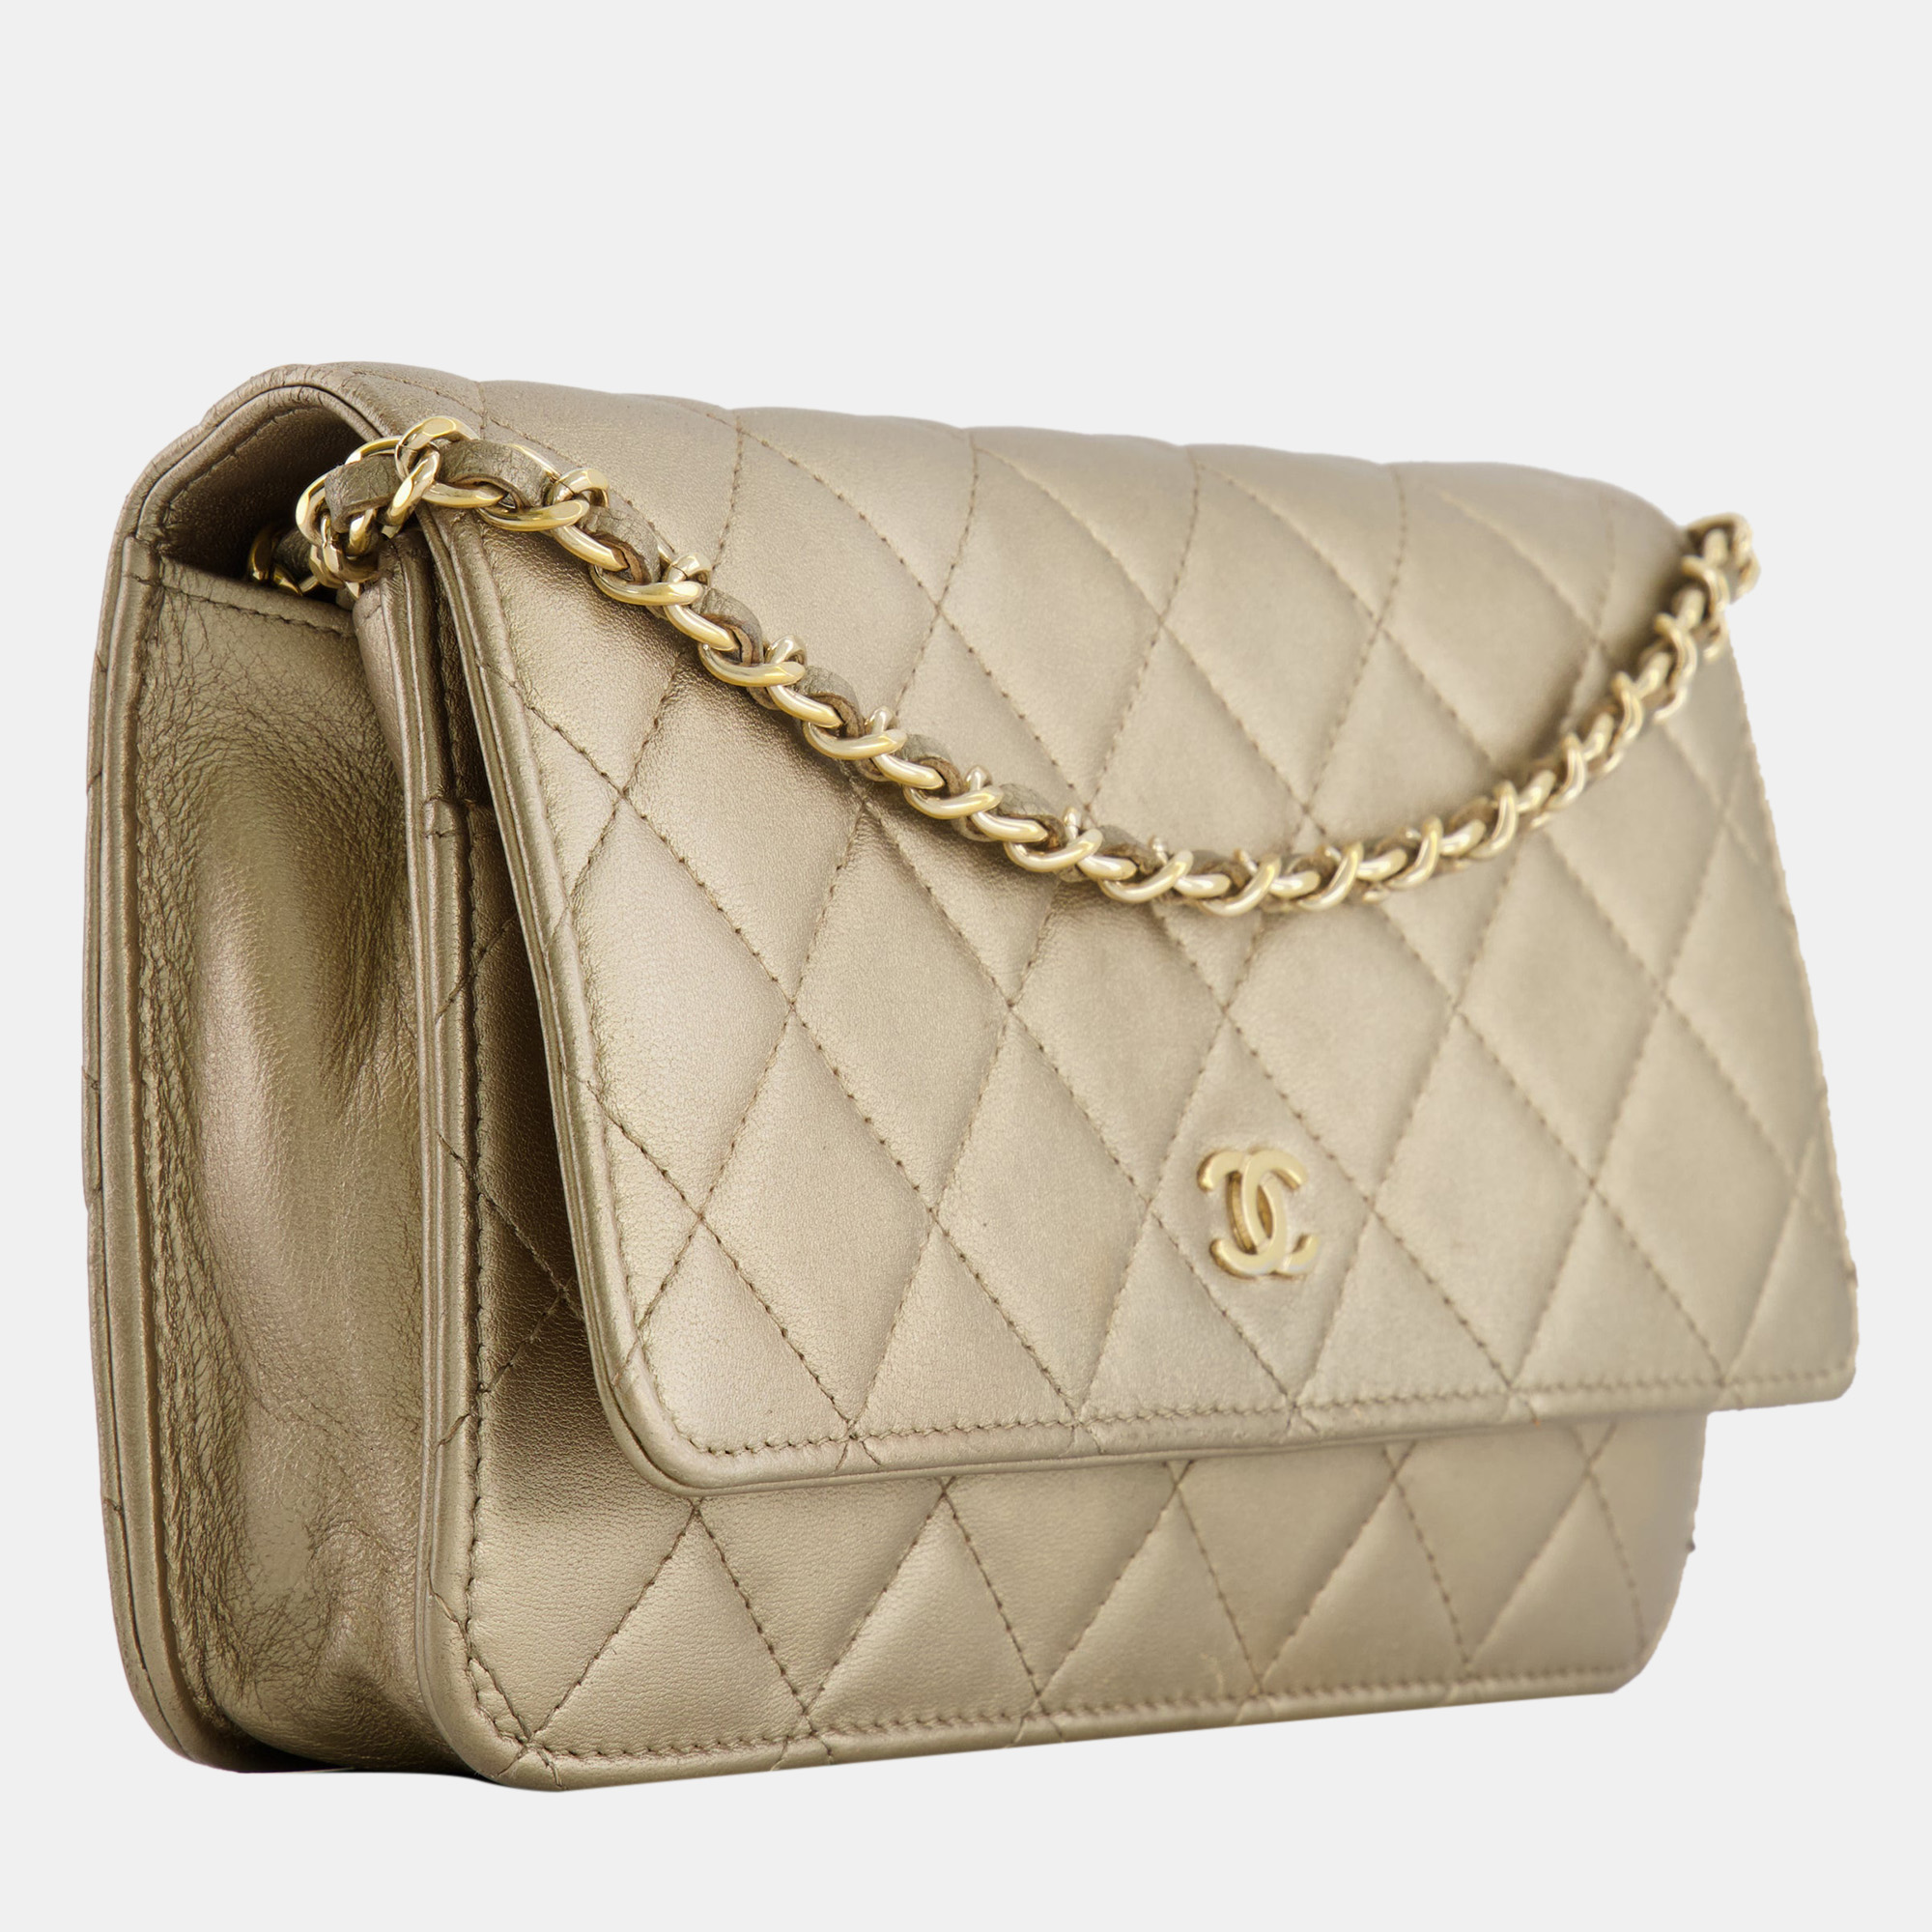 Chanel Metallic Gold Wallet On Chain Bag In Lambskin Leather With Gold Hardware